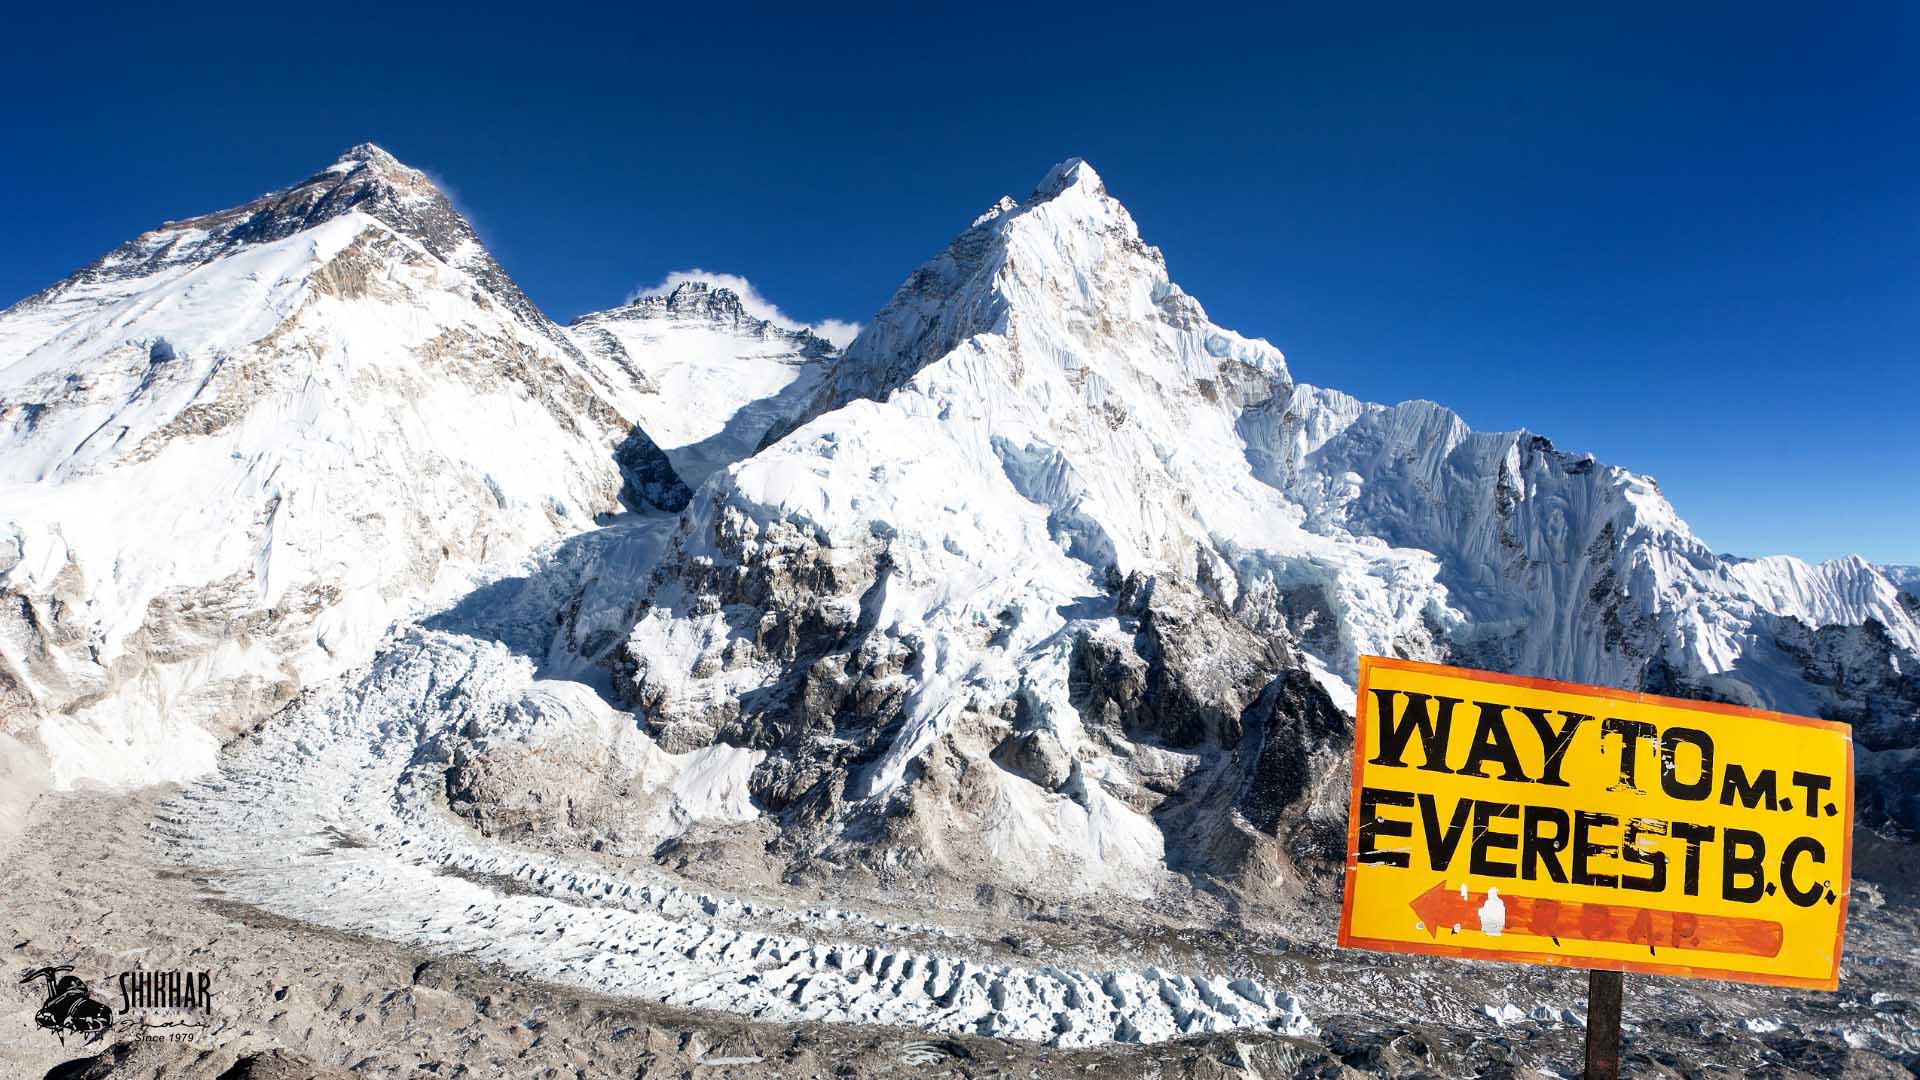 Experience Nepal with Everest Base Camp Trek